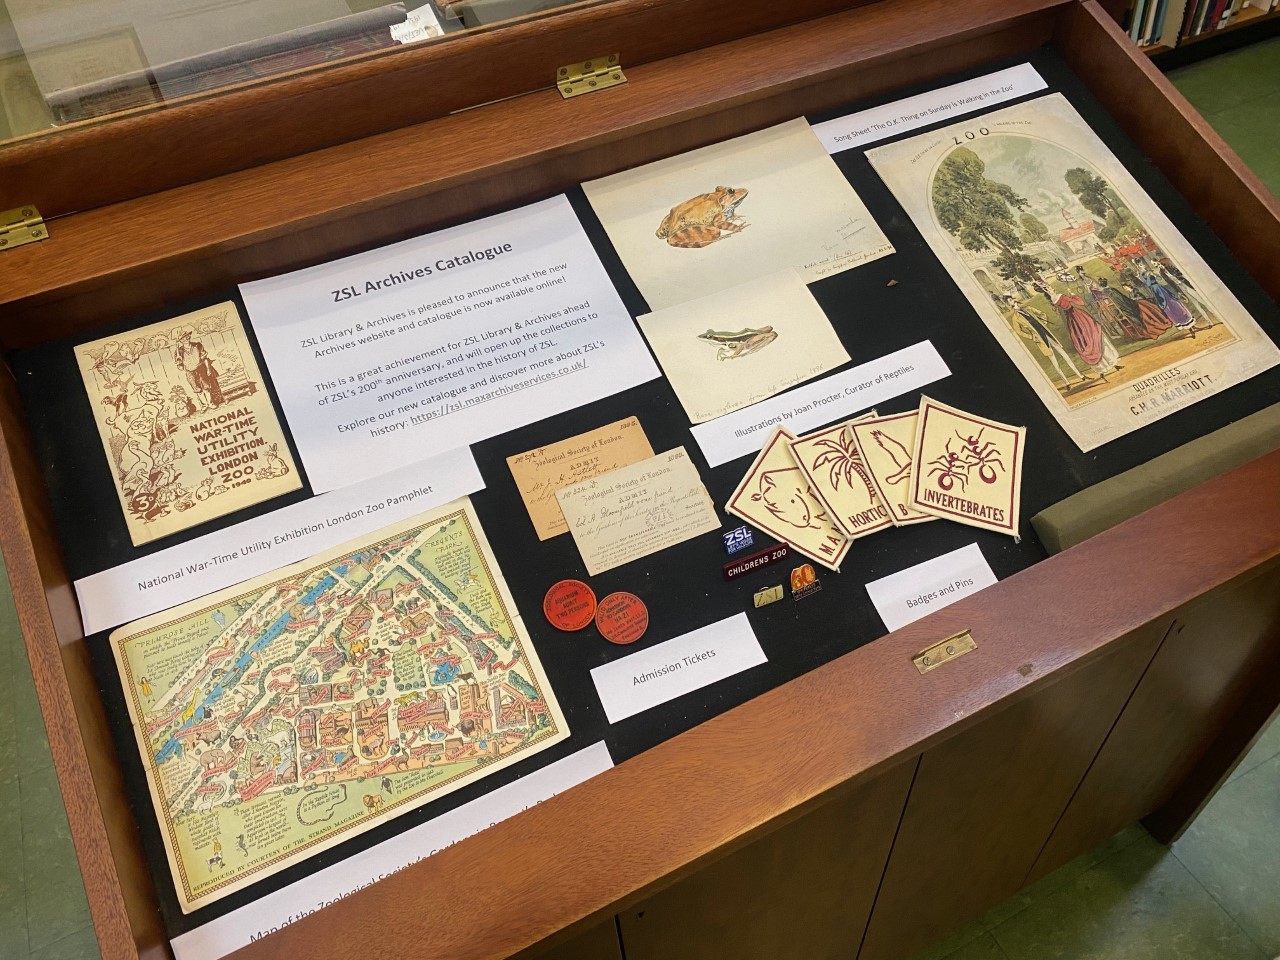 A display of leaflets, illustrations and other records